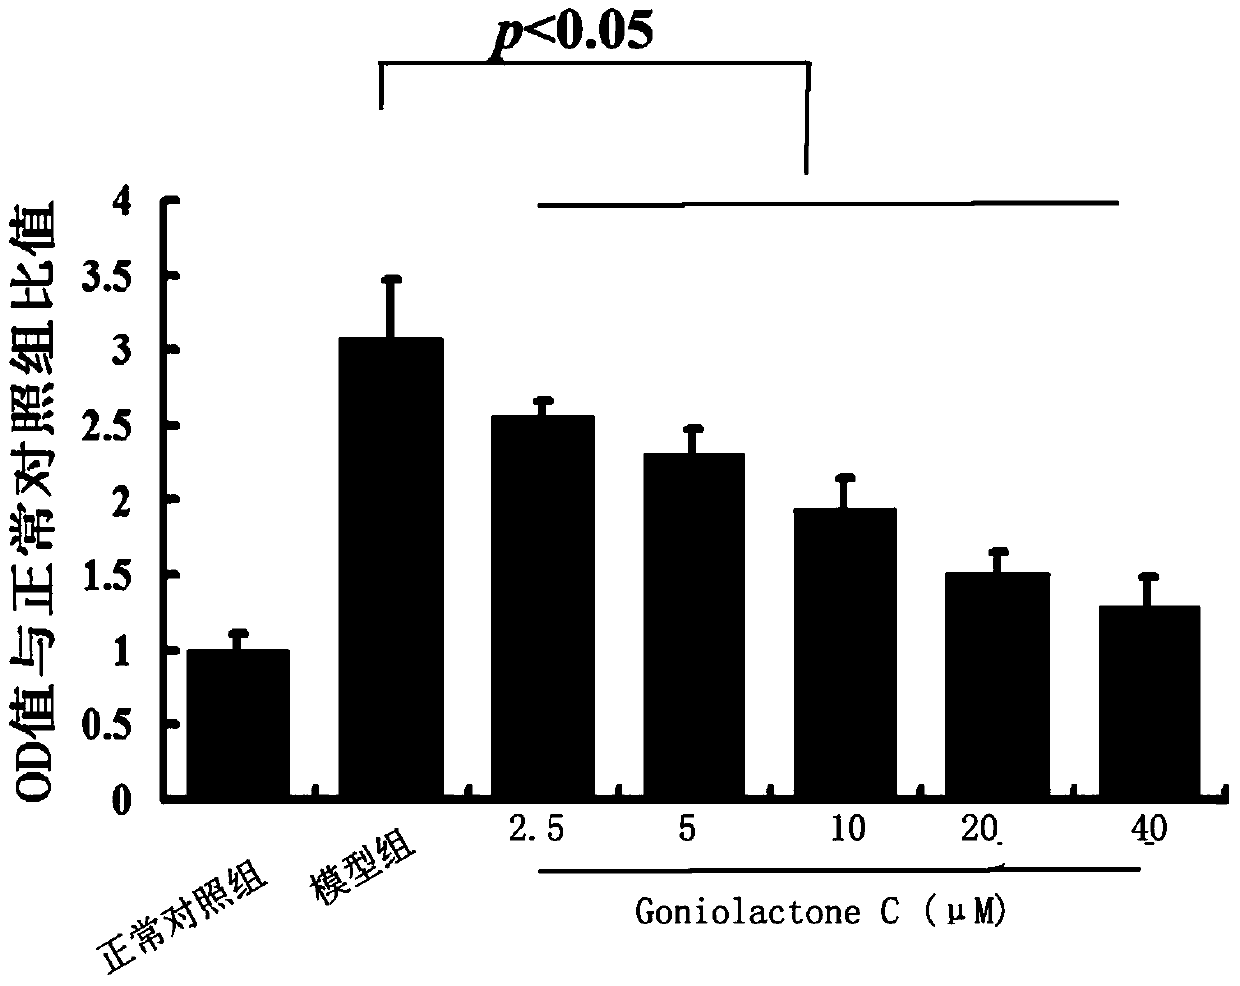 Use of cornalactone c to inhibit proliferation and migration of vascular smooth muscle cells